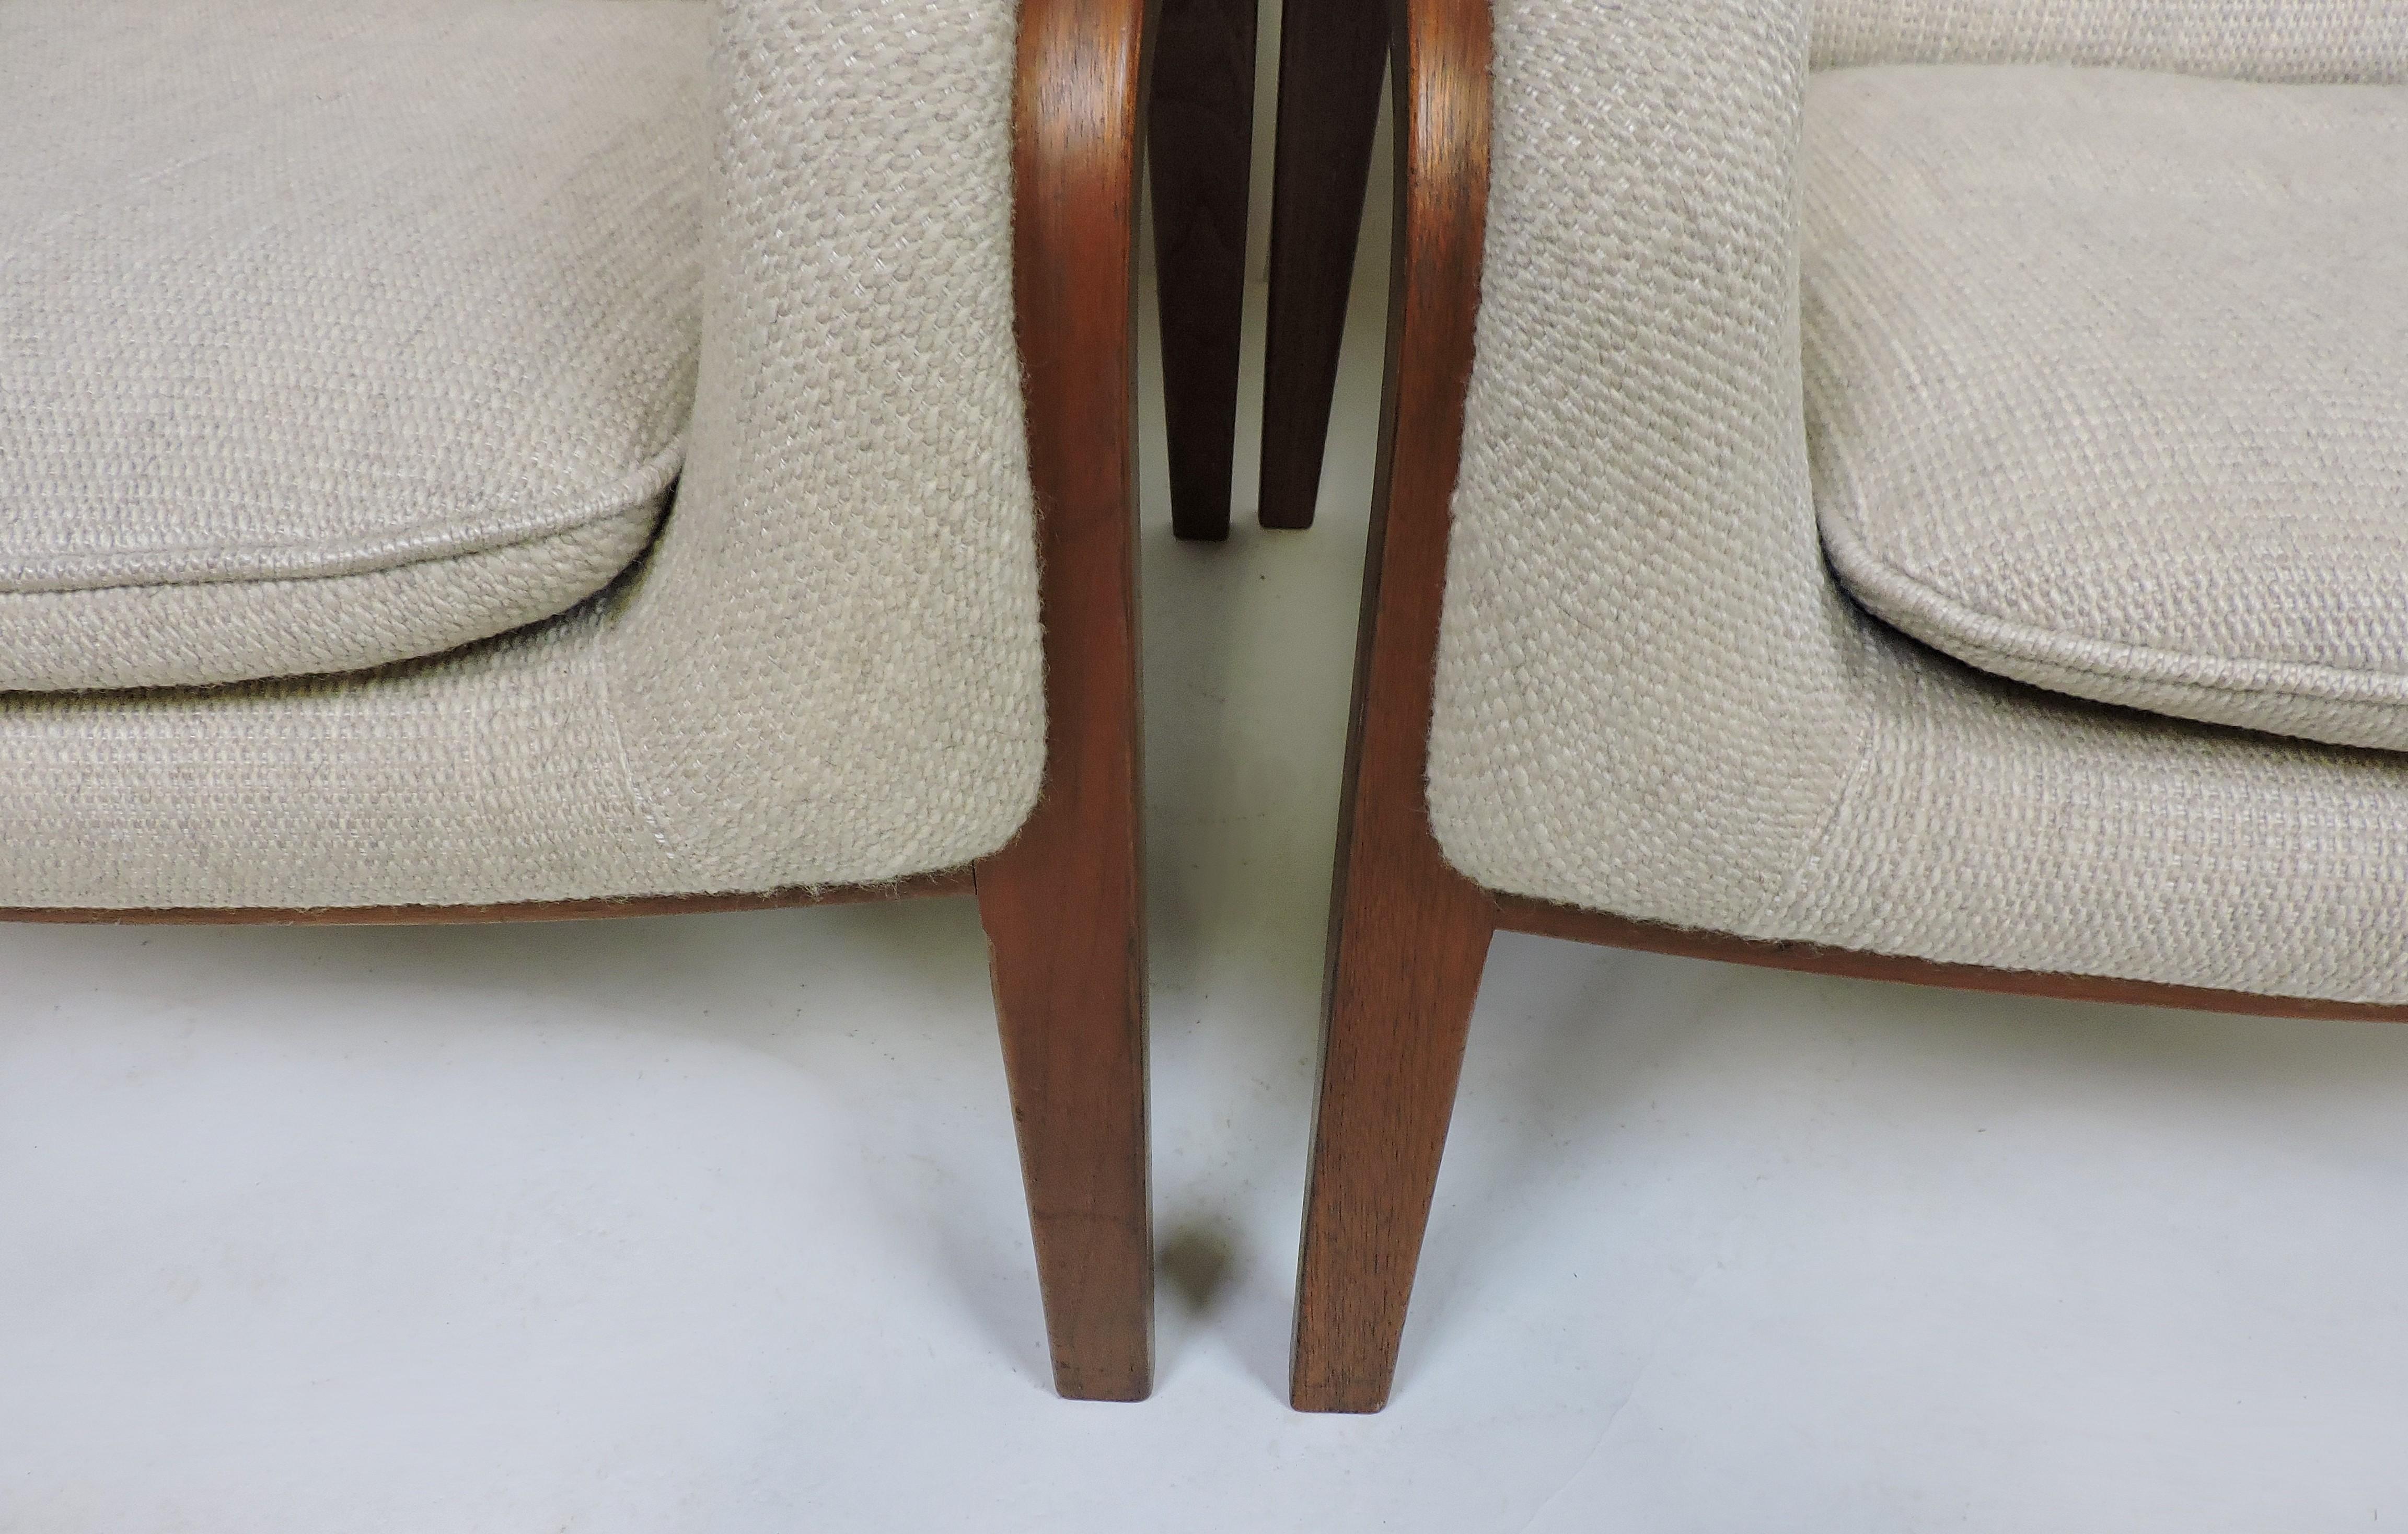 Pair of Bill Stephens Mid-Century Modern Bentwood Lounge Chairs for Knoll 1